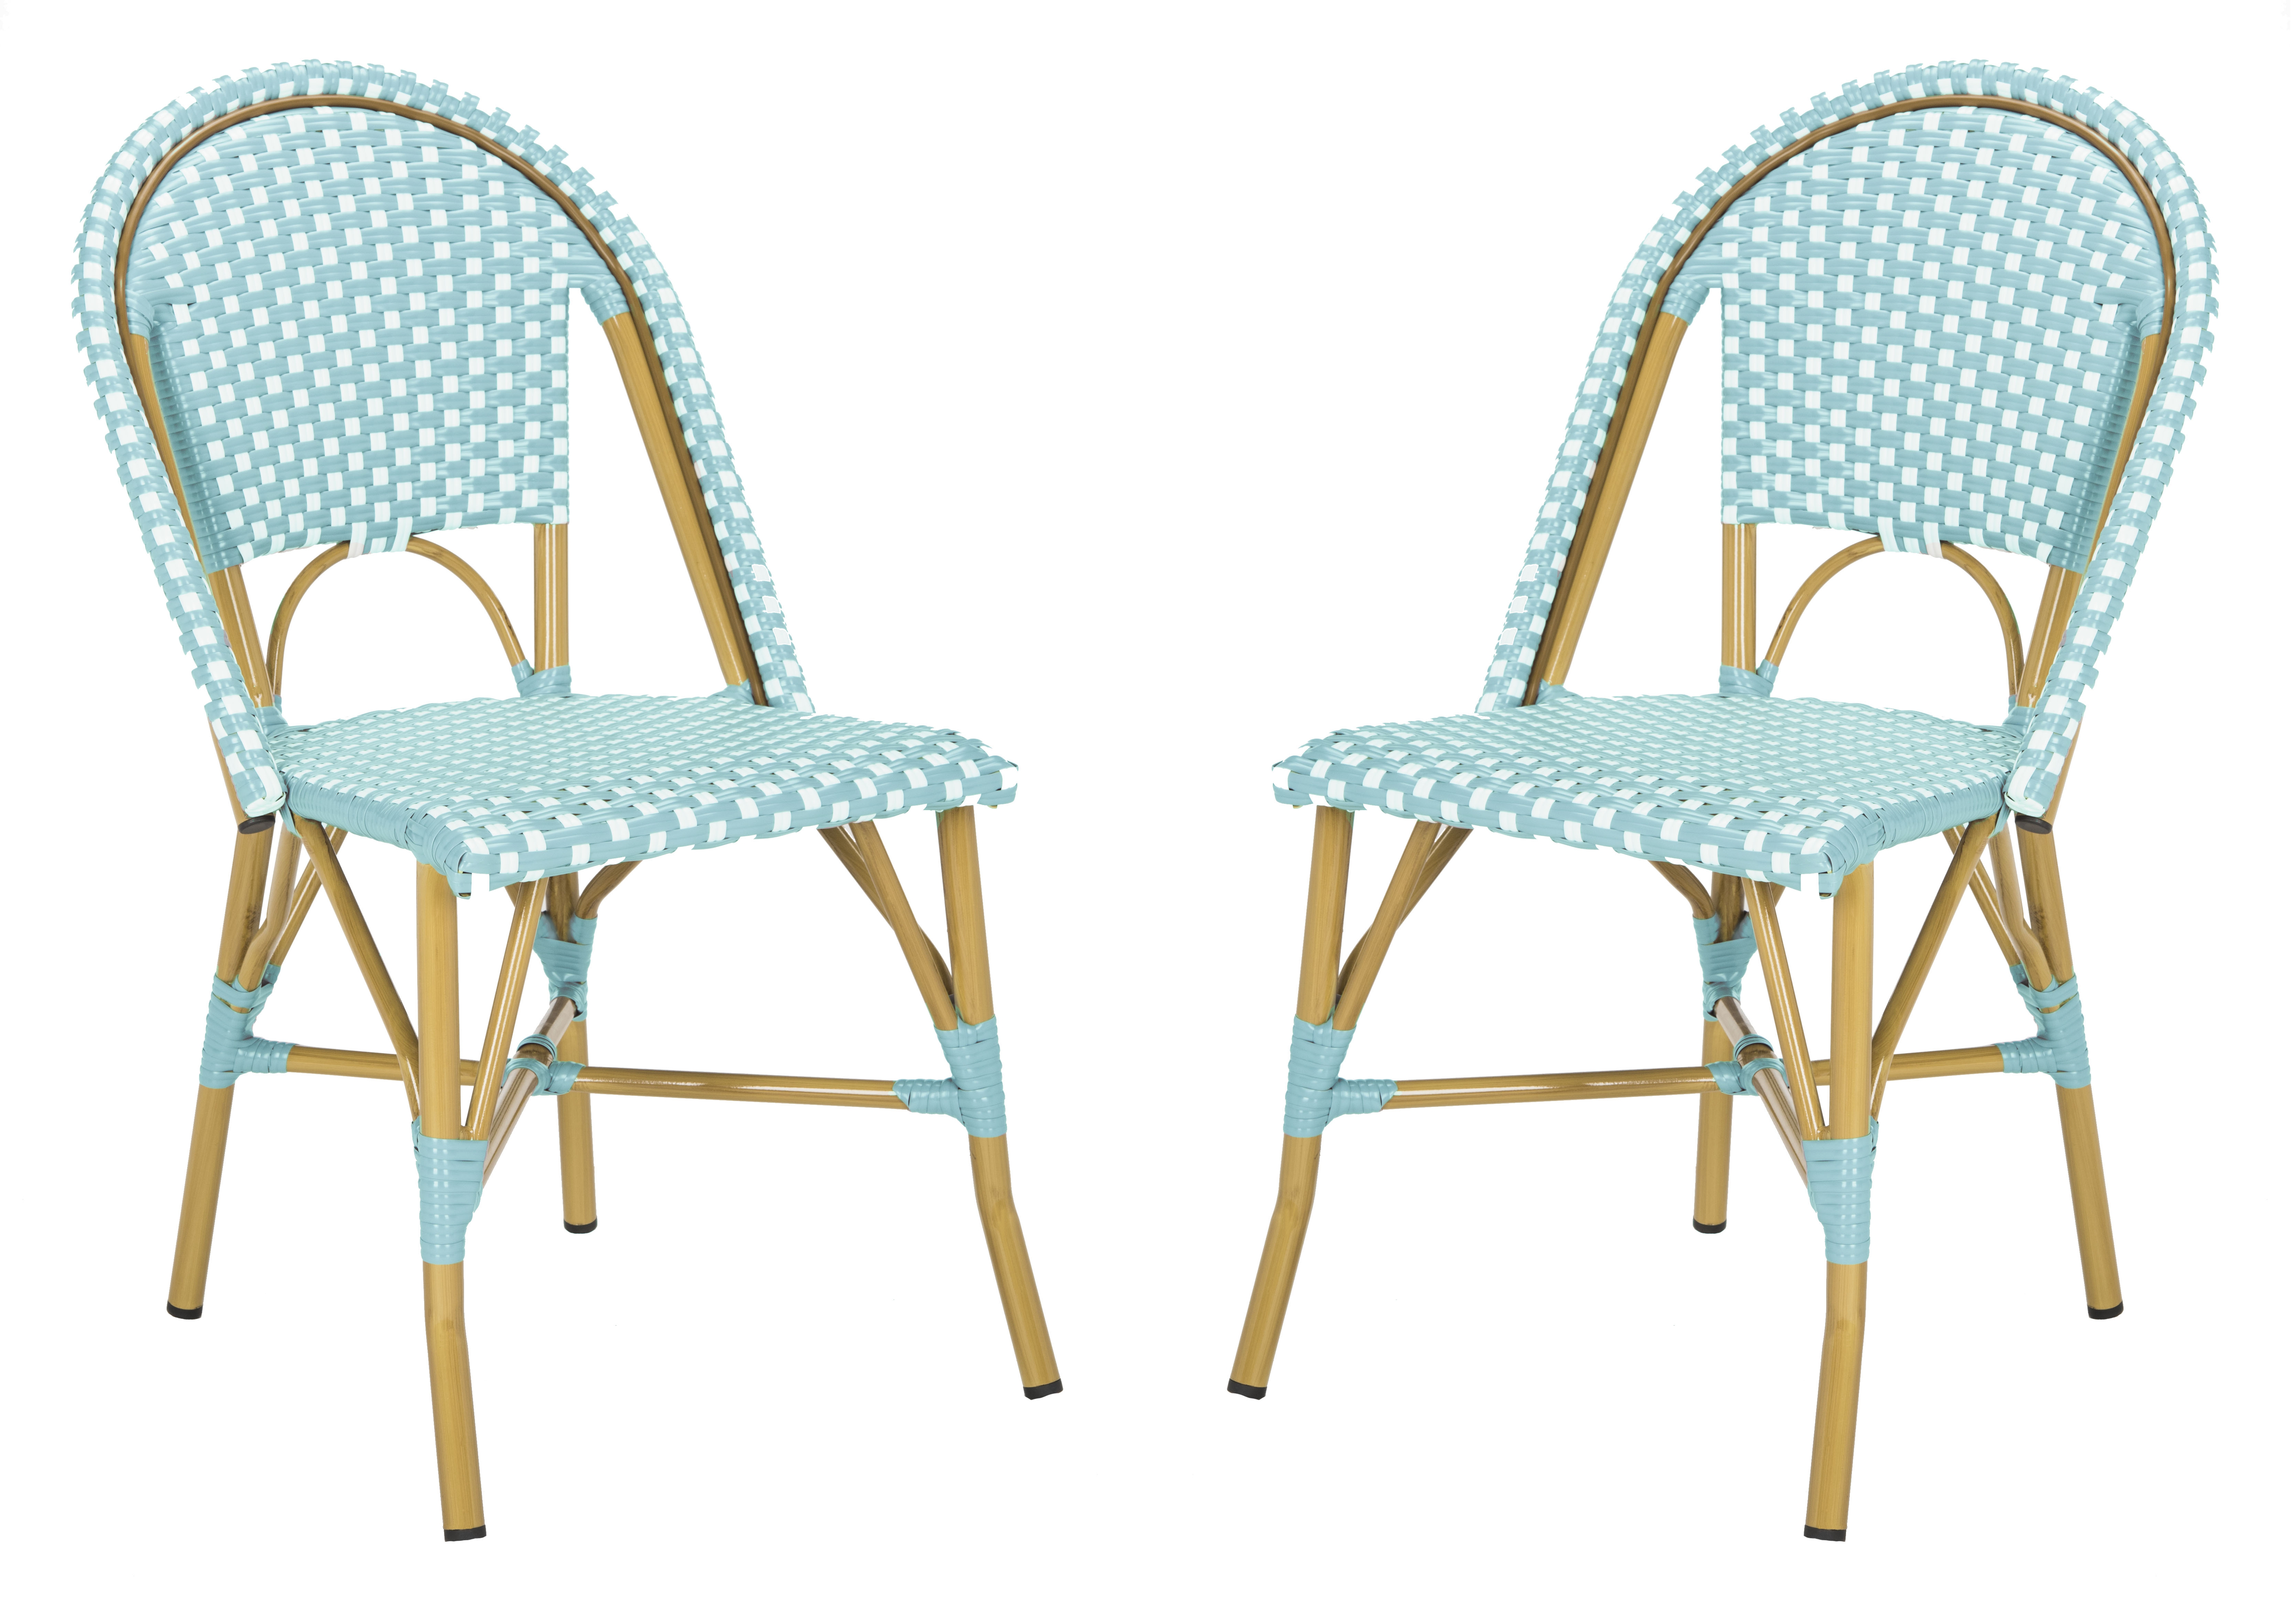 Salcha Indoor-Outdoor French Bistro Stacking Side Chair - Teal/White/Light Brown - Arlo Home - Arlo Home